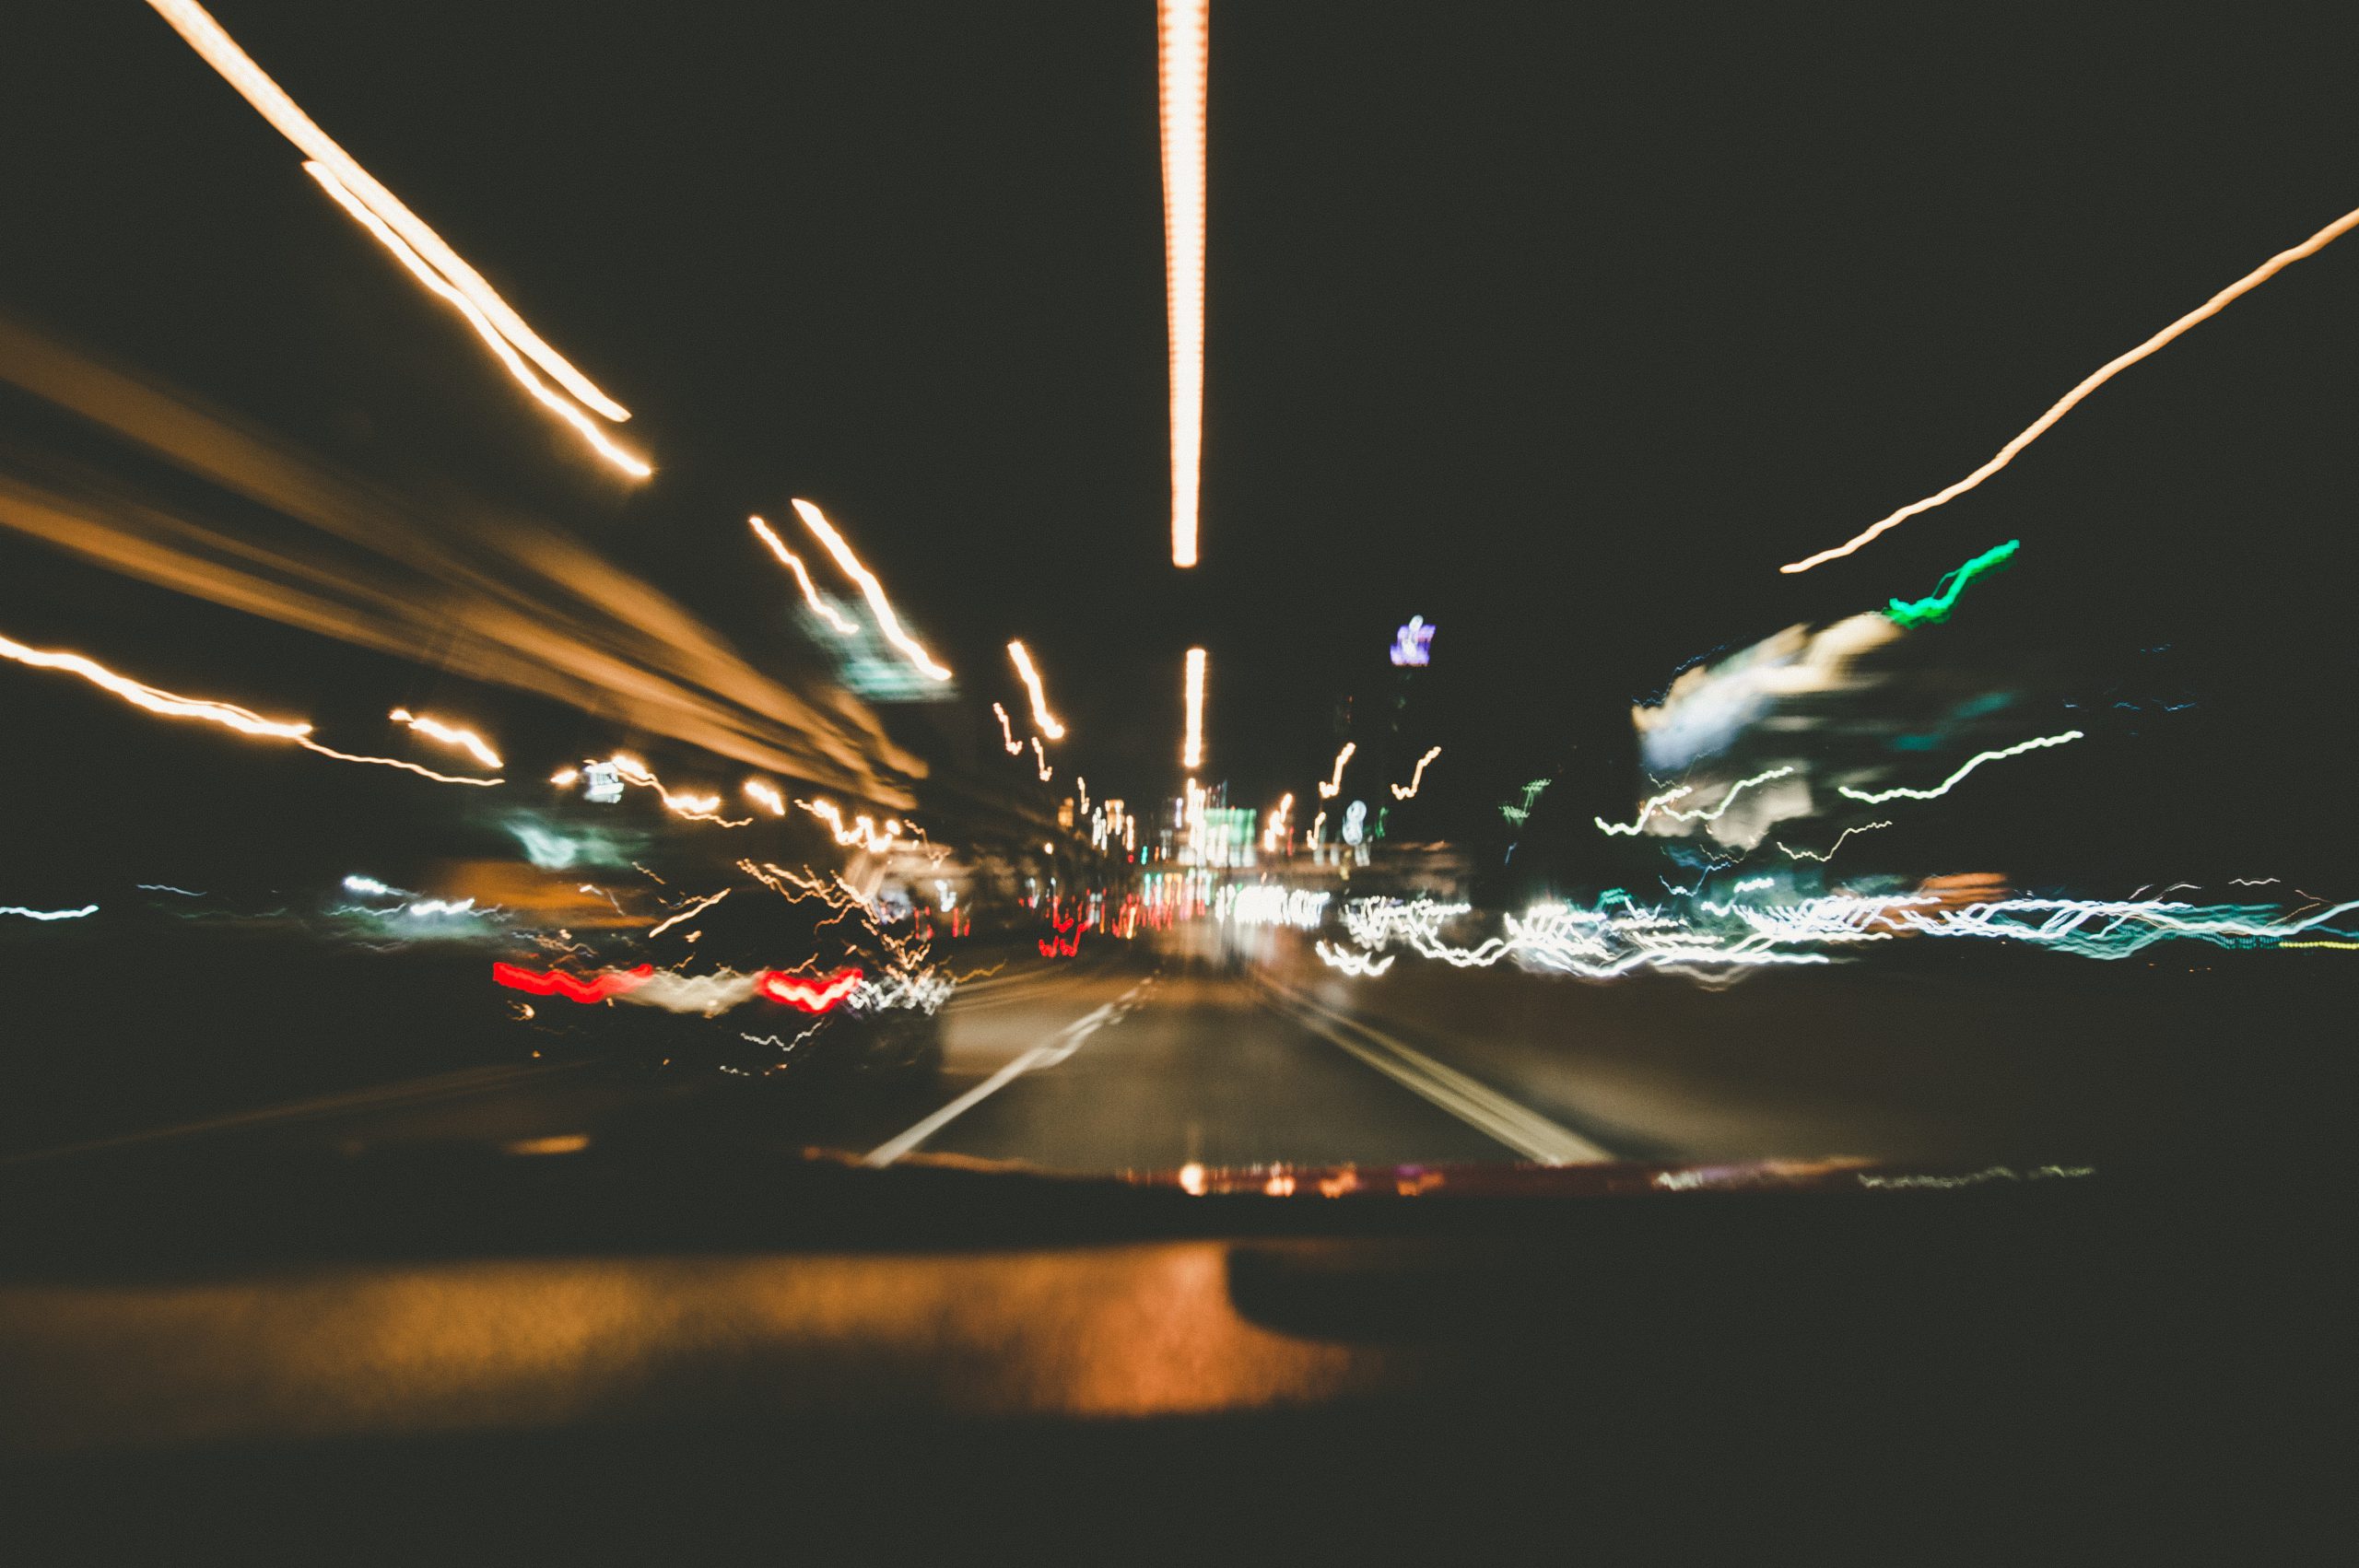 blurred streetlights seen through the windshield of a car in motion